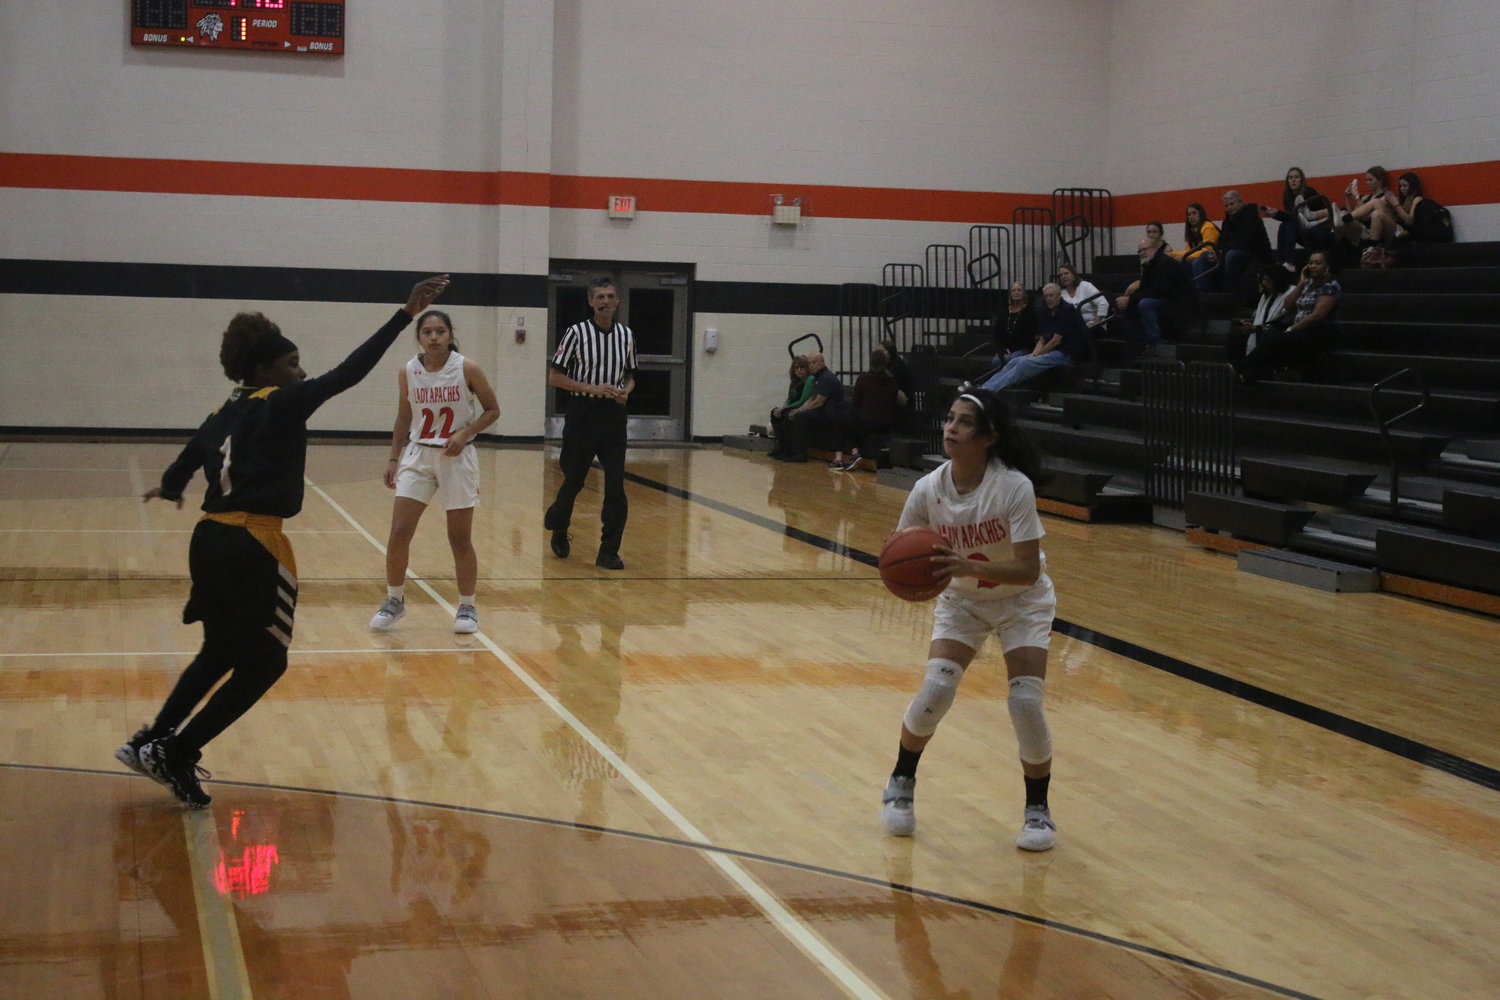 Bella Aguero hits one of her three three-pointers against Sealy. She scored 13 points as Gonzales won, 66-54.